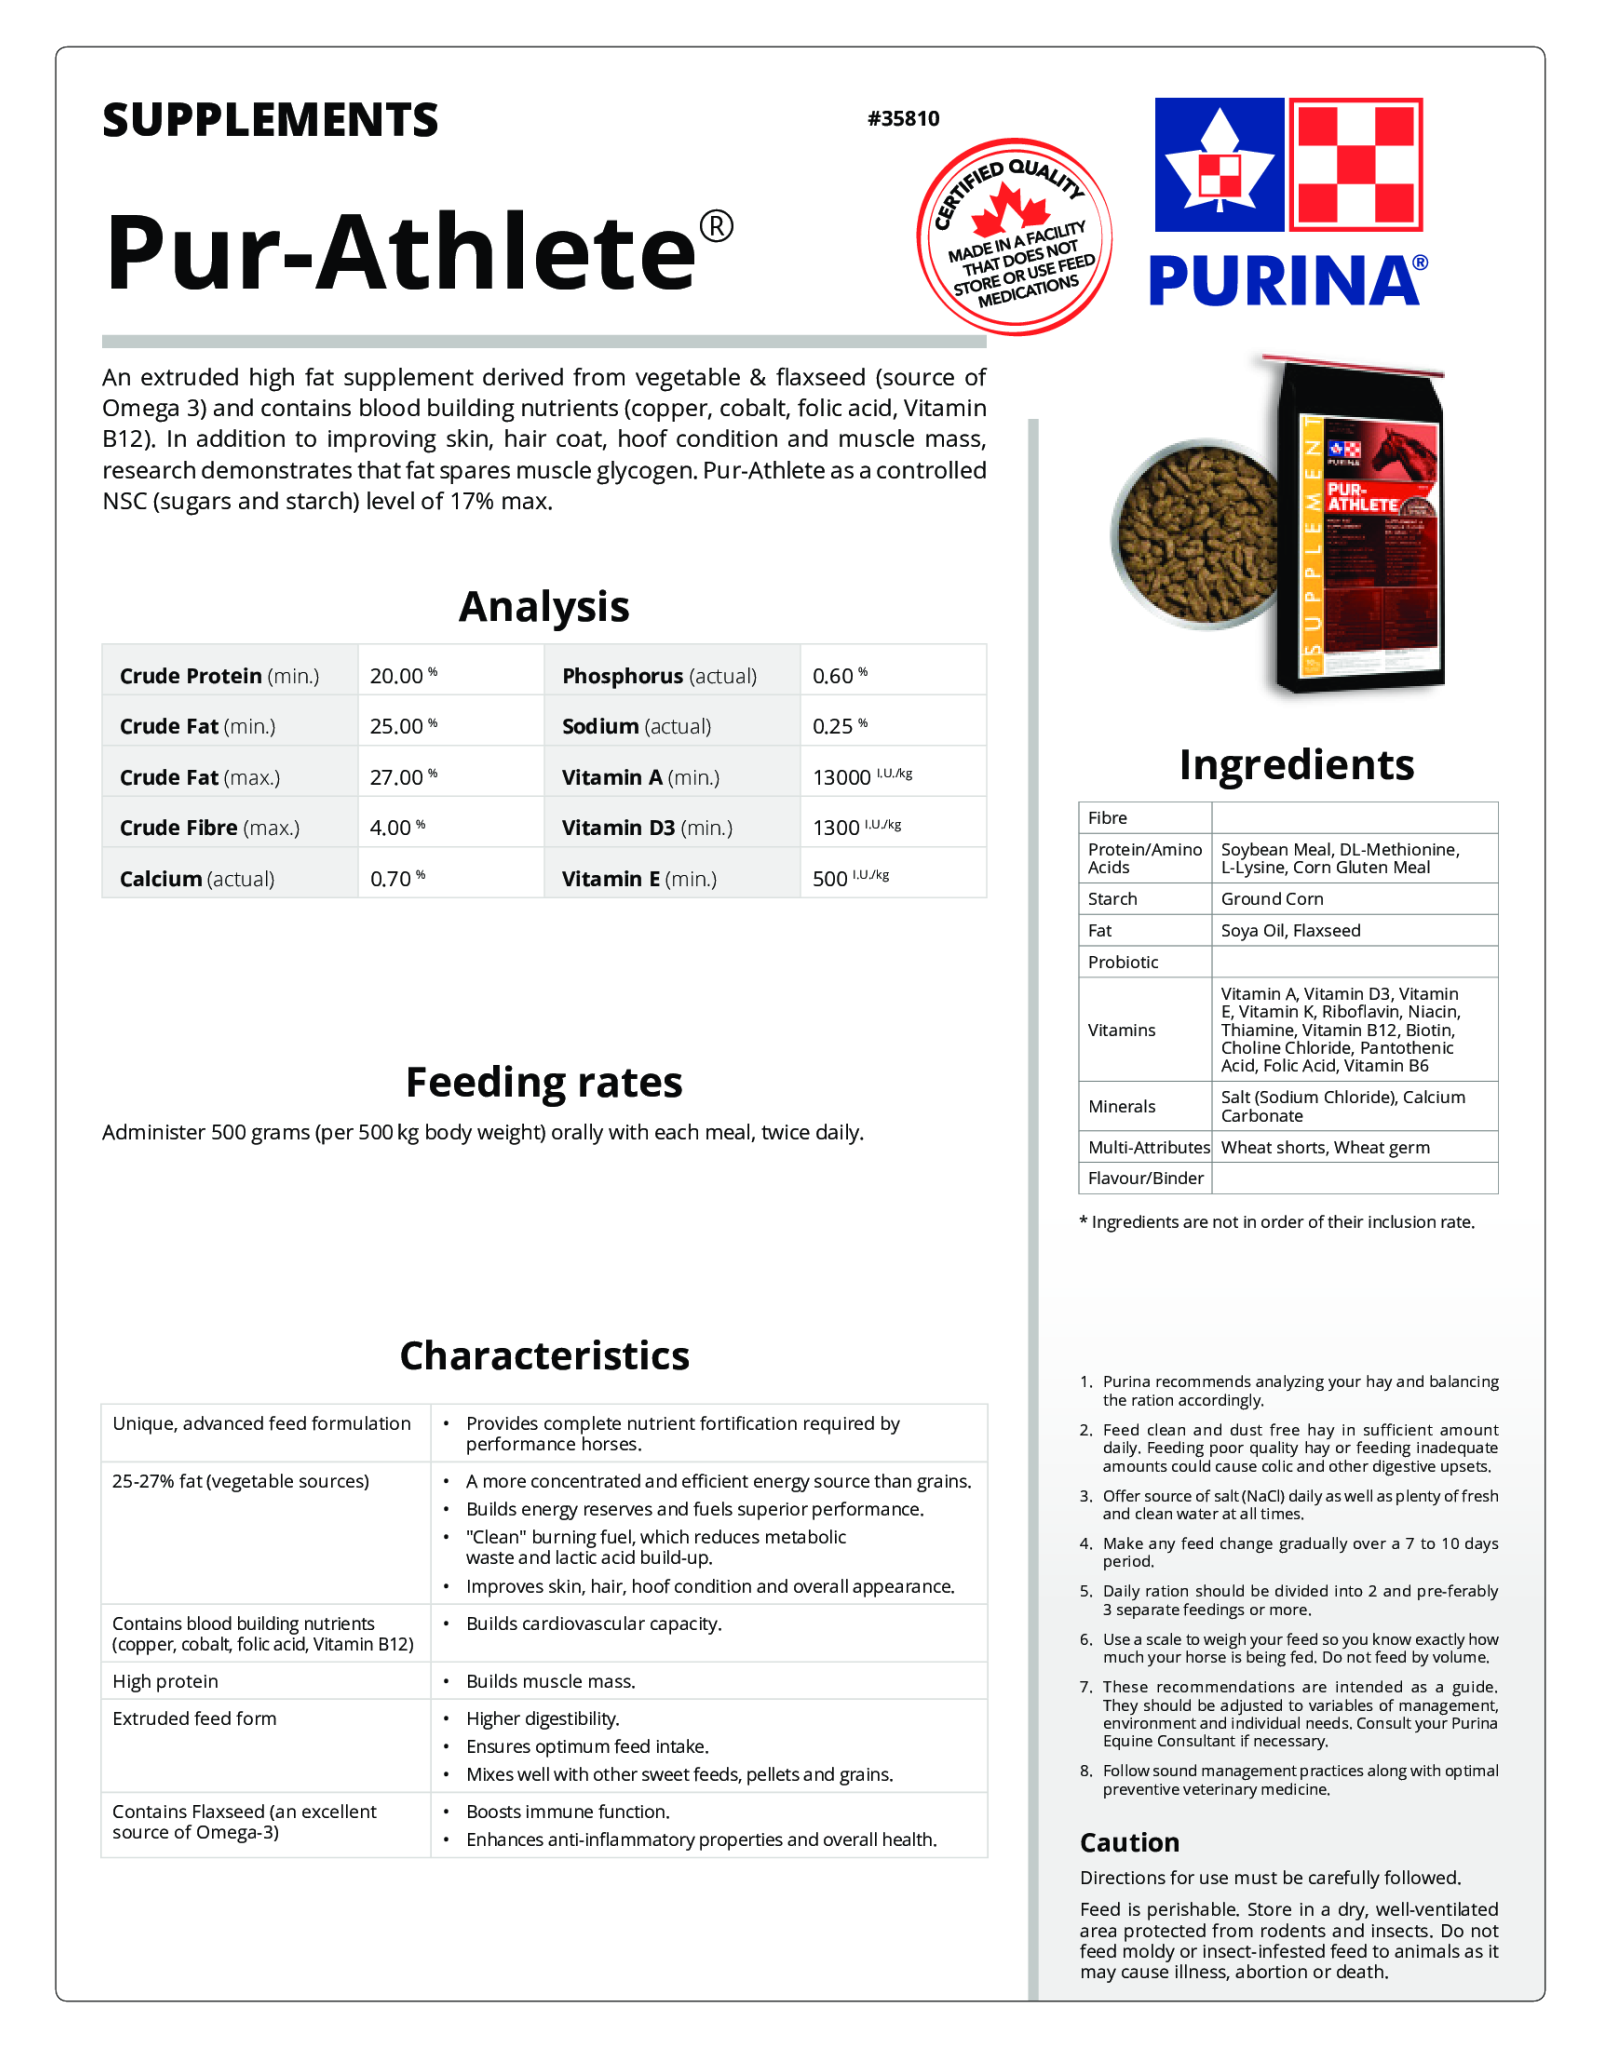 Purina PURINA PUR - ATHLETE SUPPLEMENT 20kg  -  CP35810 - NSC 15% Max - CP 20%, Fat 27%, Fiber 4.0% -   An extruded fat supplement containing vegetable oil and flaxseed -  Formulated to provide added energy and nutrients for performance horses. - IN STORE